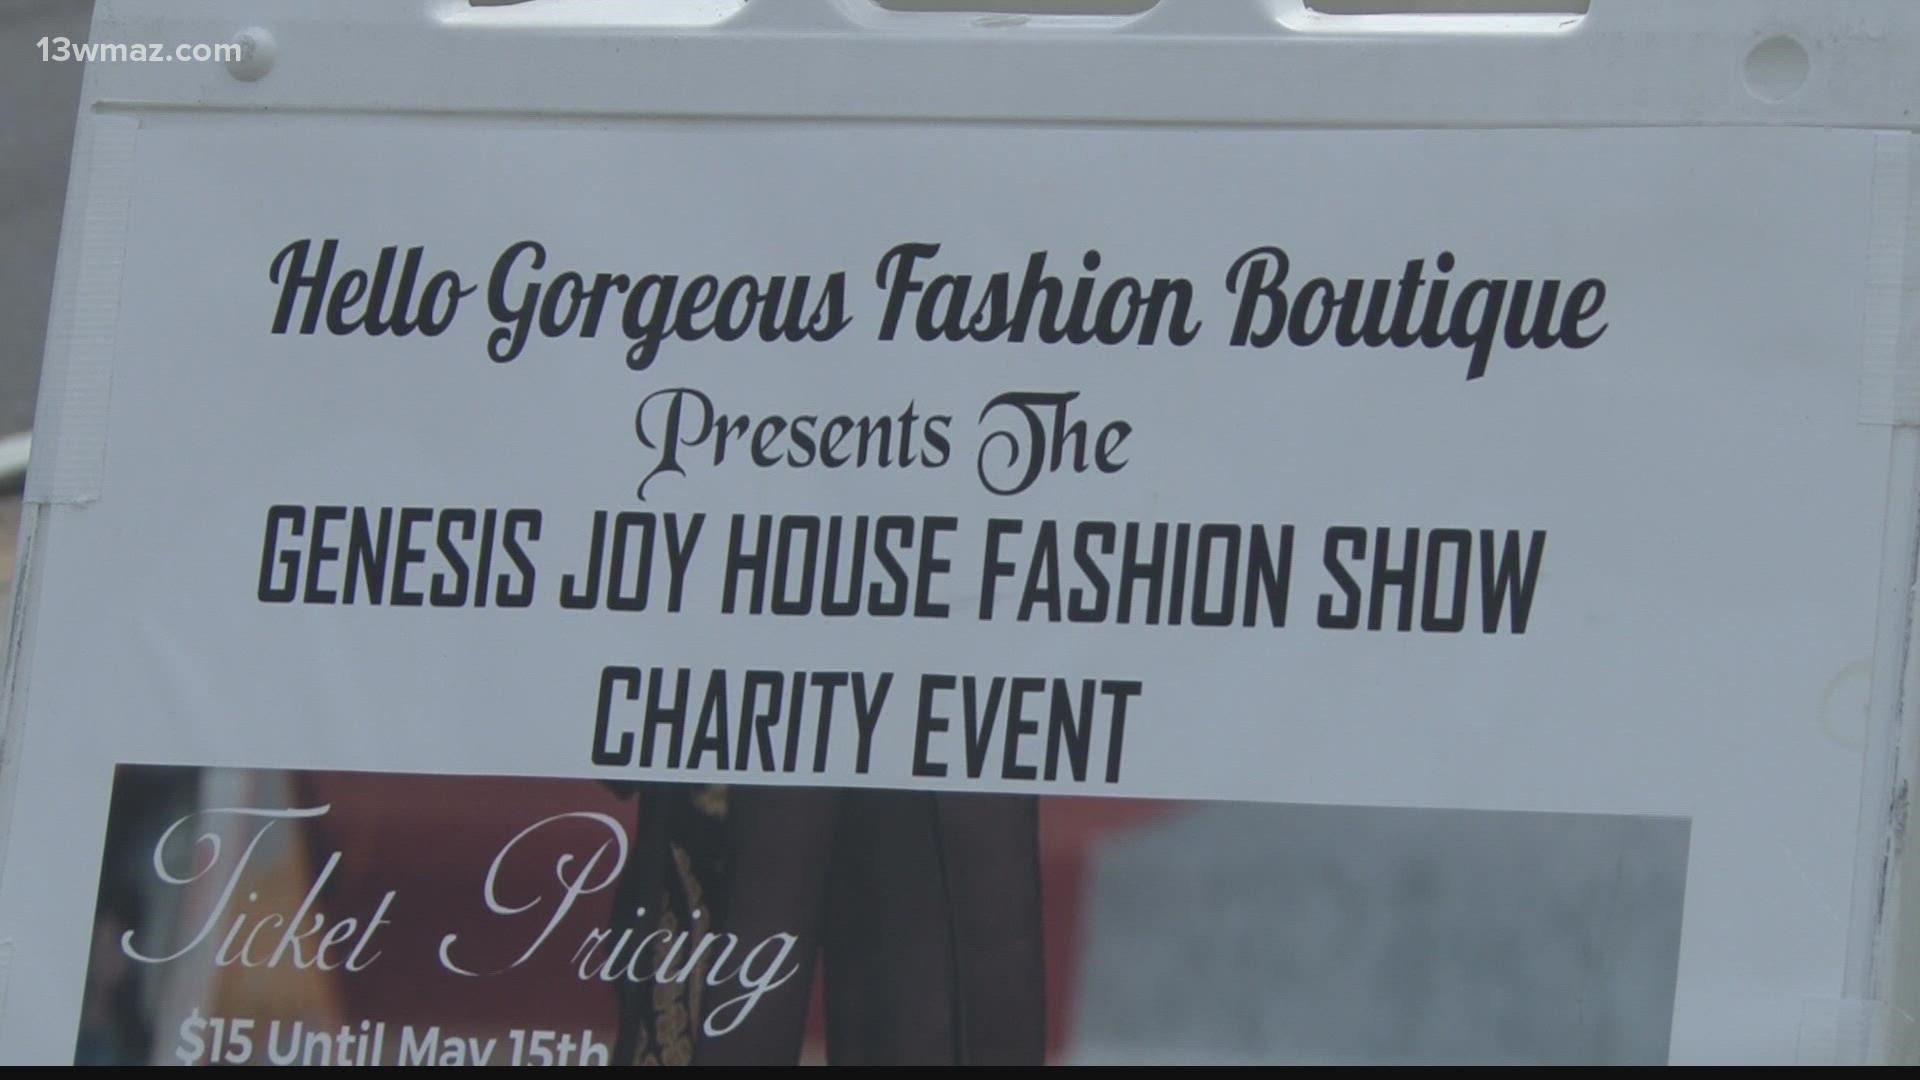 Hello Gorgeous Fashion Boutique will hold a fashion show and auction with proceeds going to the Genesis Joy House in Warner Robins.